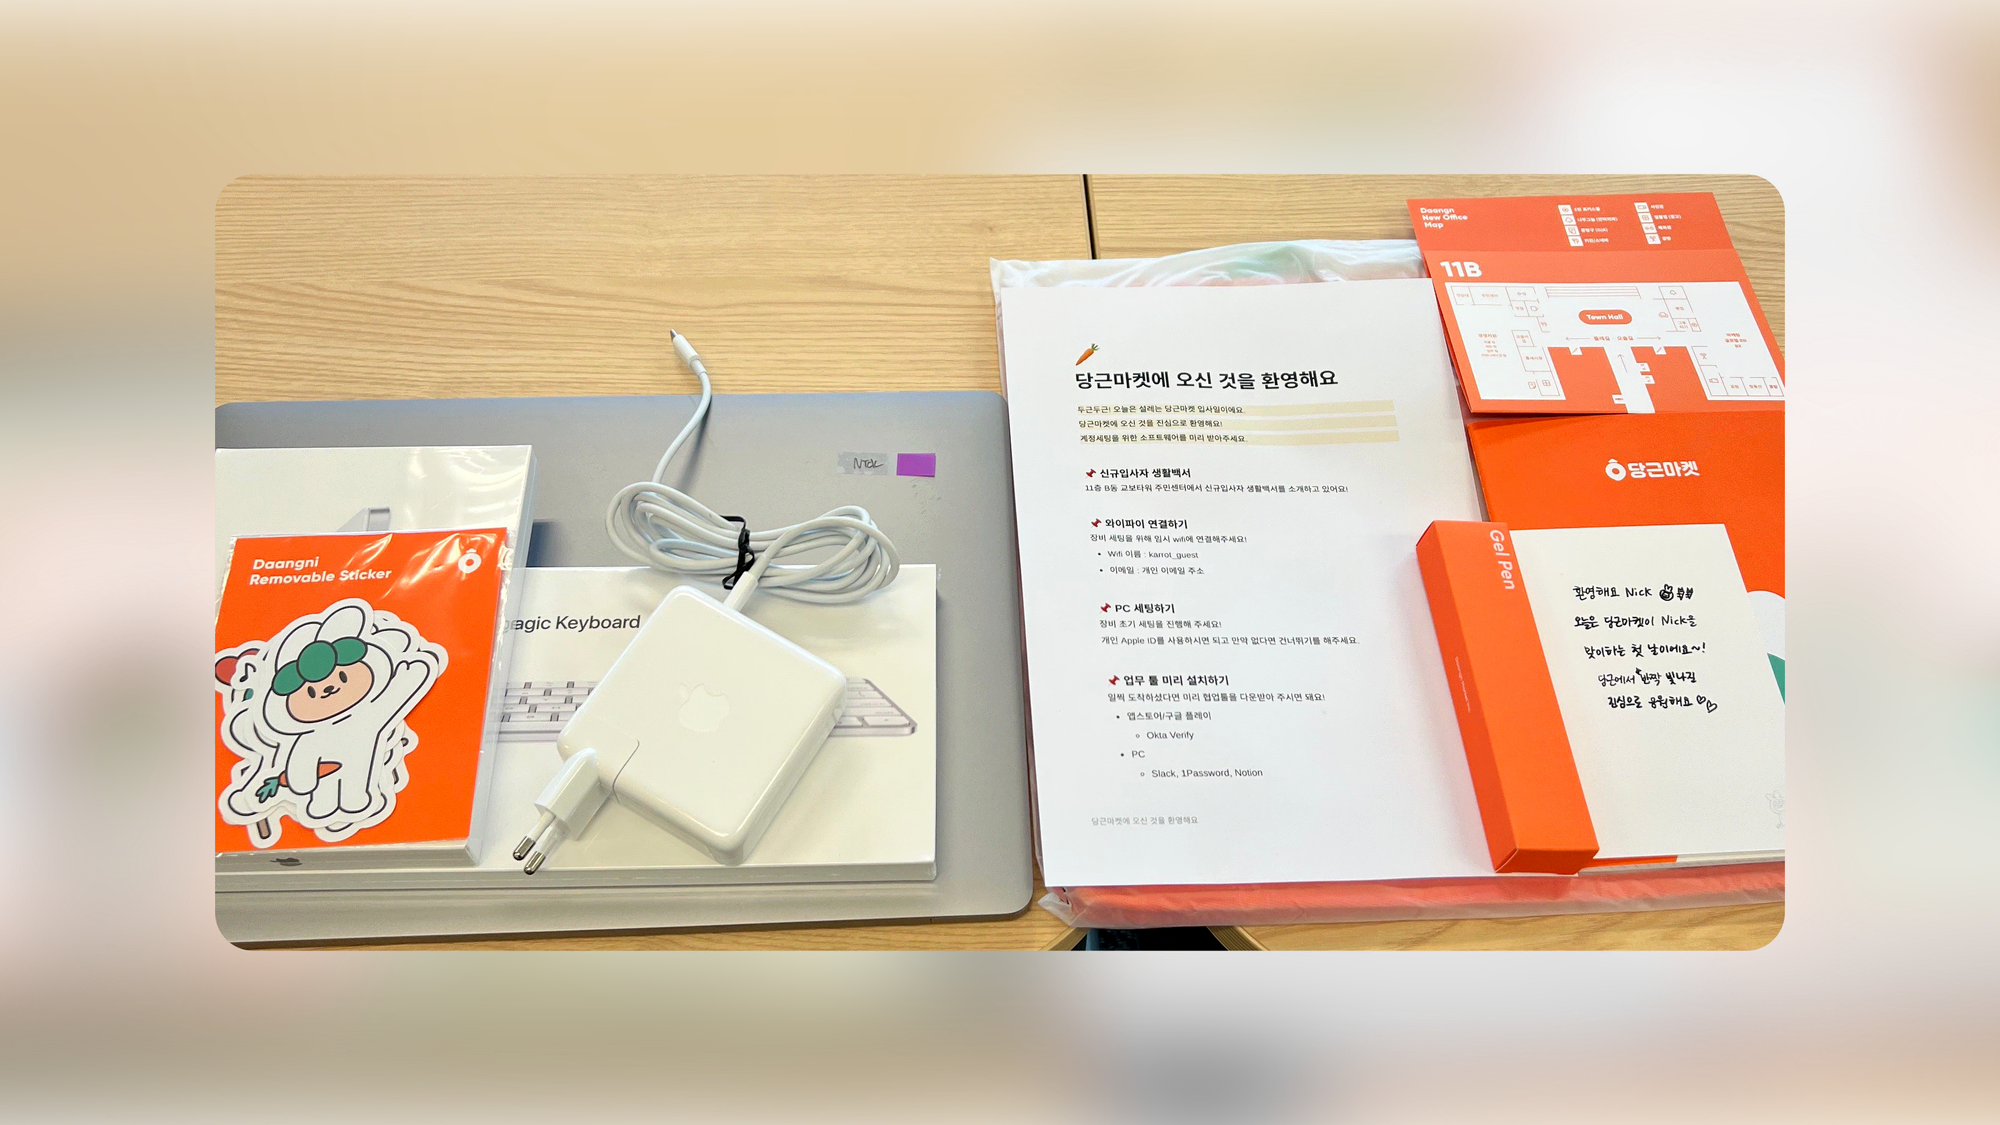 Banner image showing onboarding goods such as MacBook, charger, sticker, guide, etc.